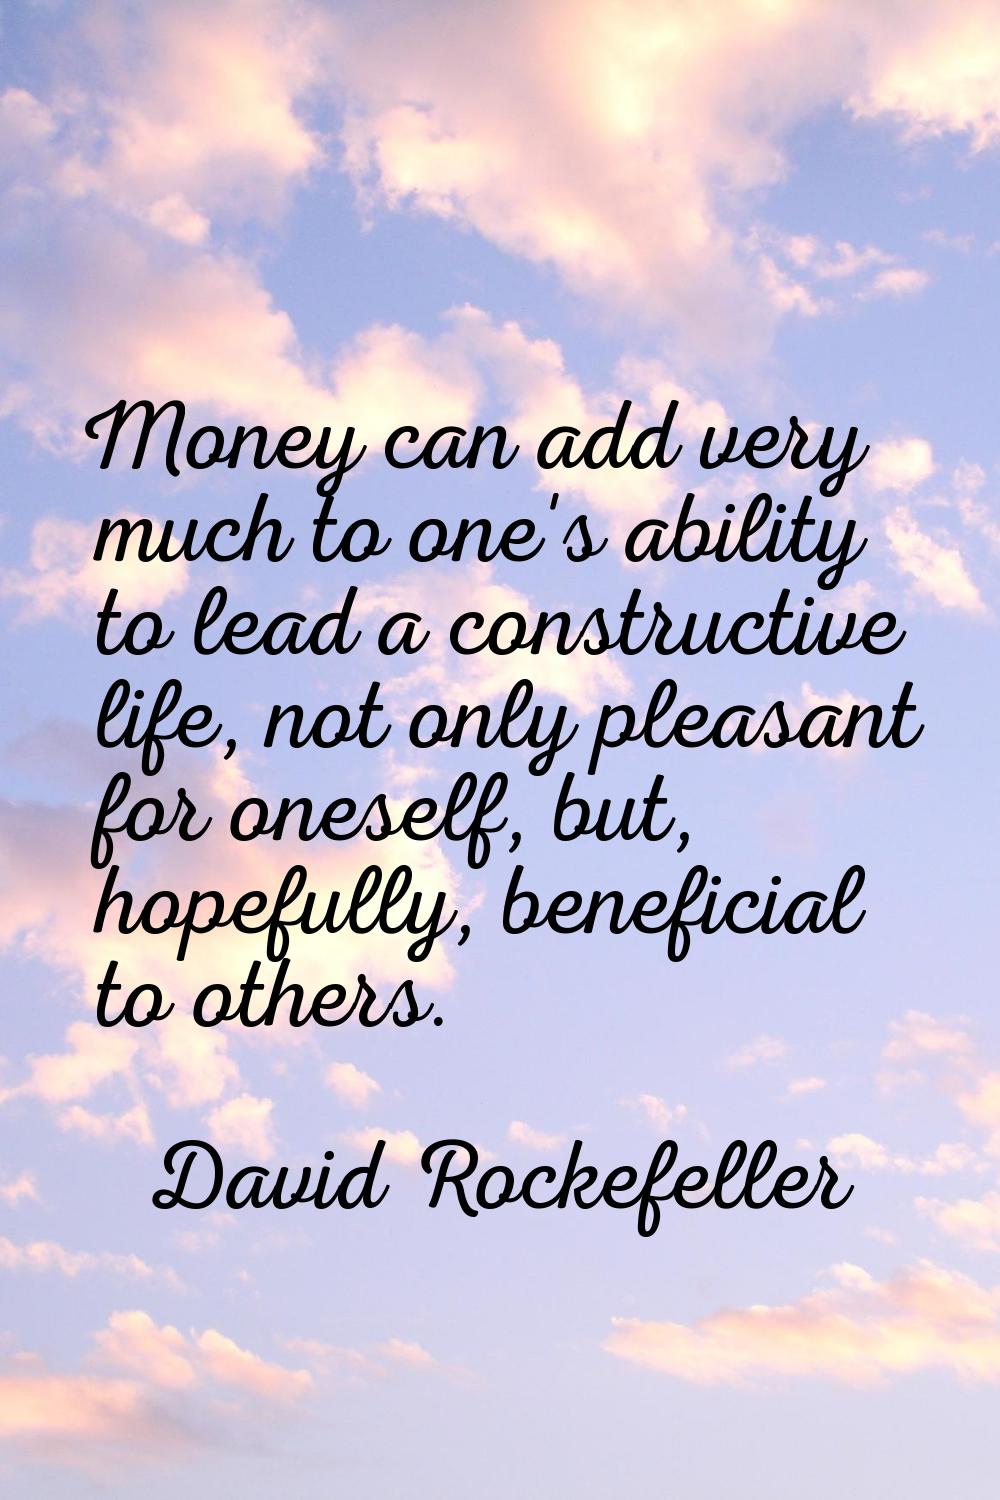 Money can add very much to one's ability to lead a constructive life, not only pleasant for oneself